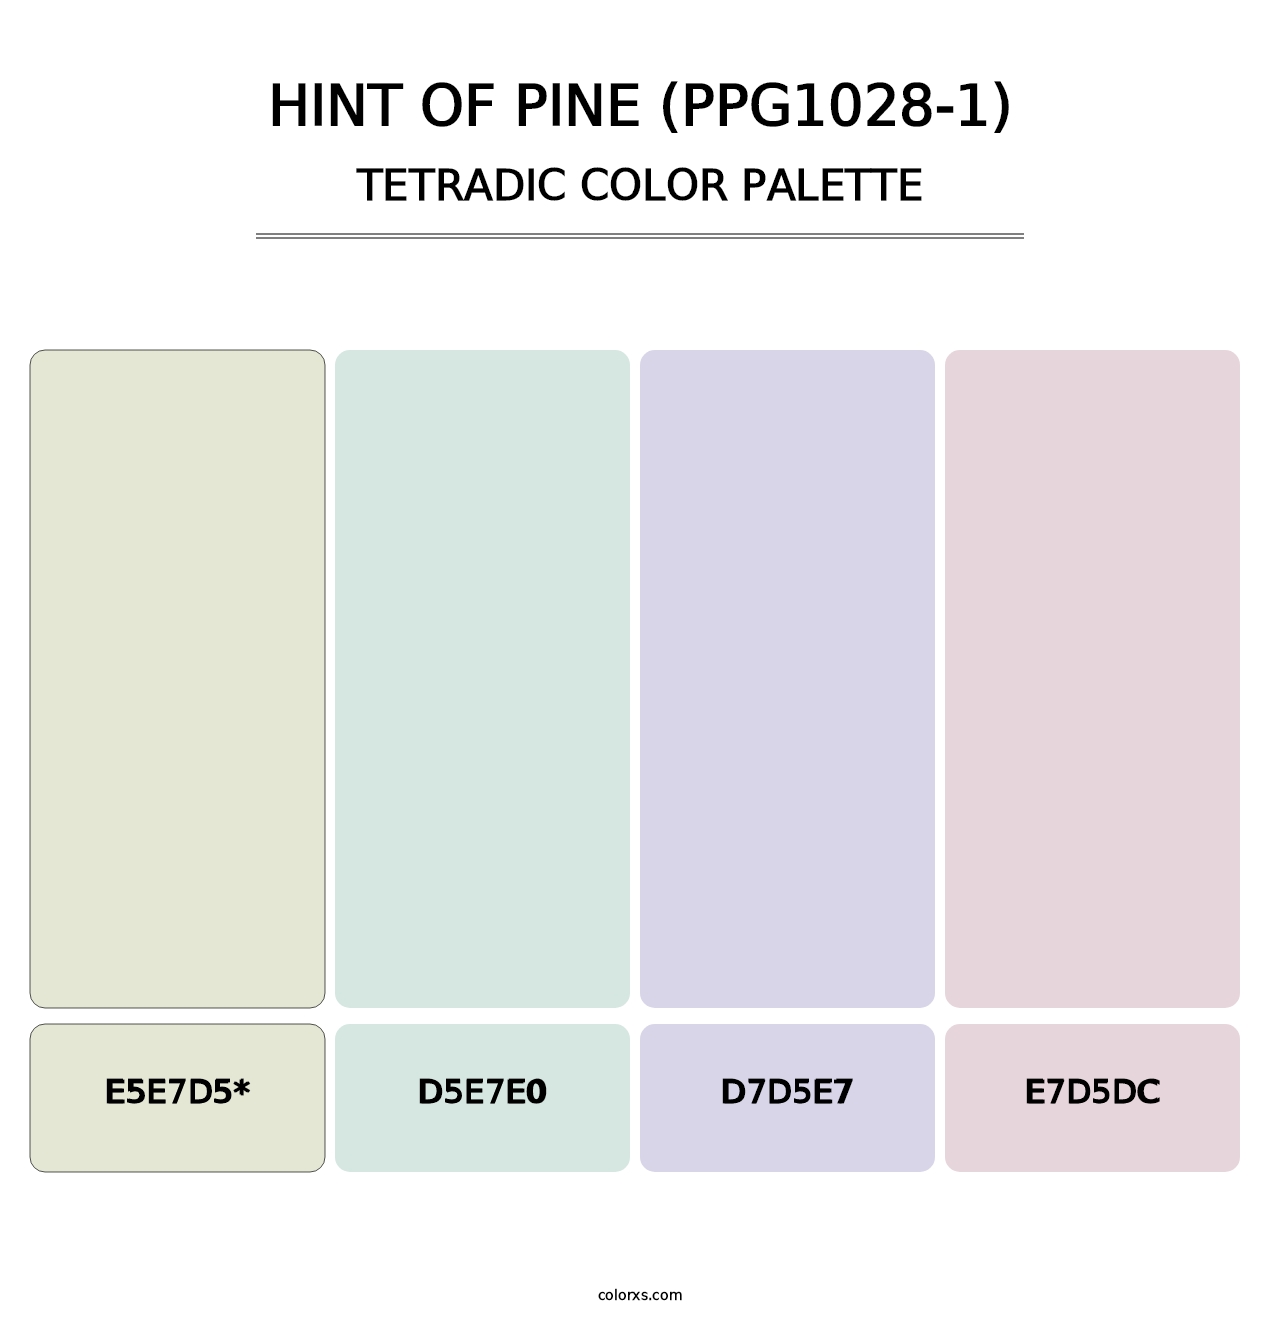 Hint Of Pine (PPG1028-1) - Tetradic Color Palette